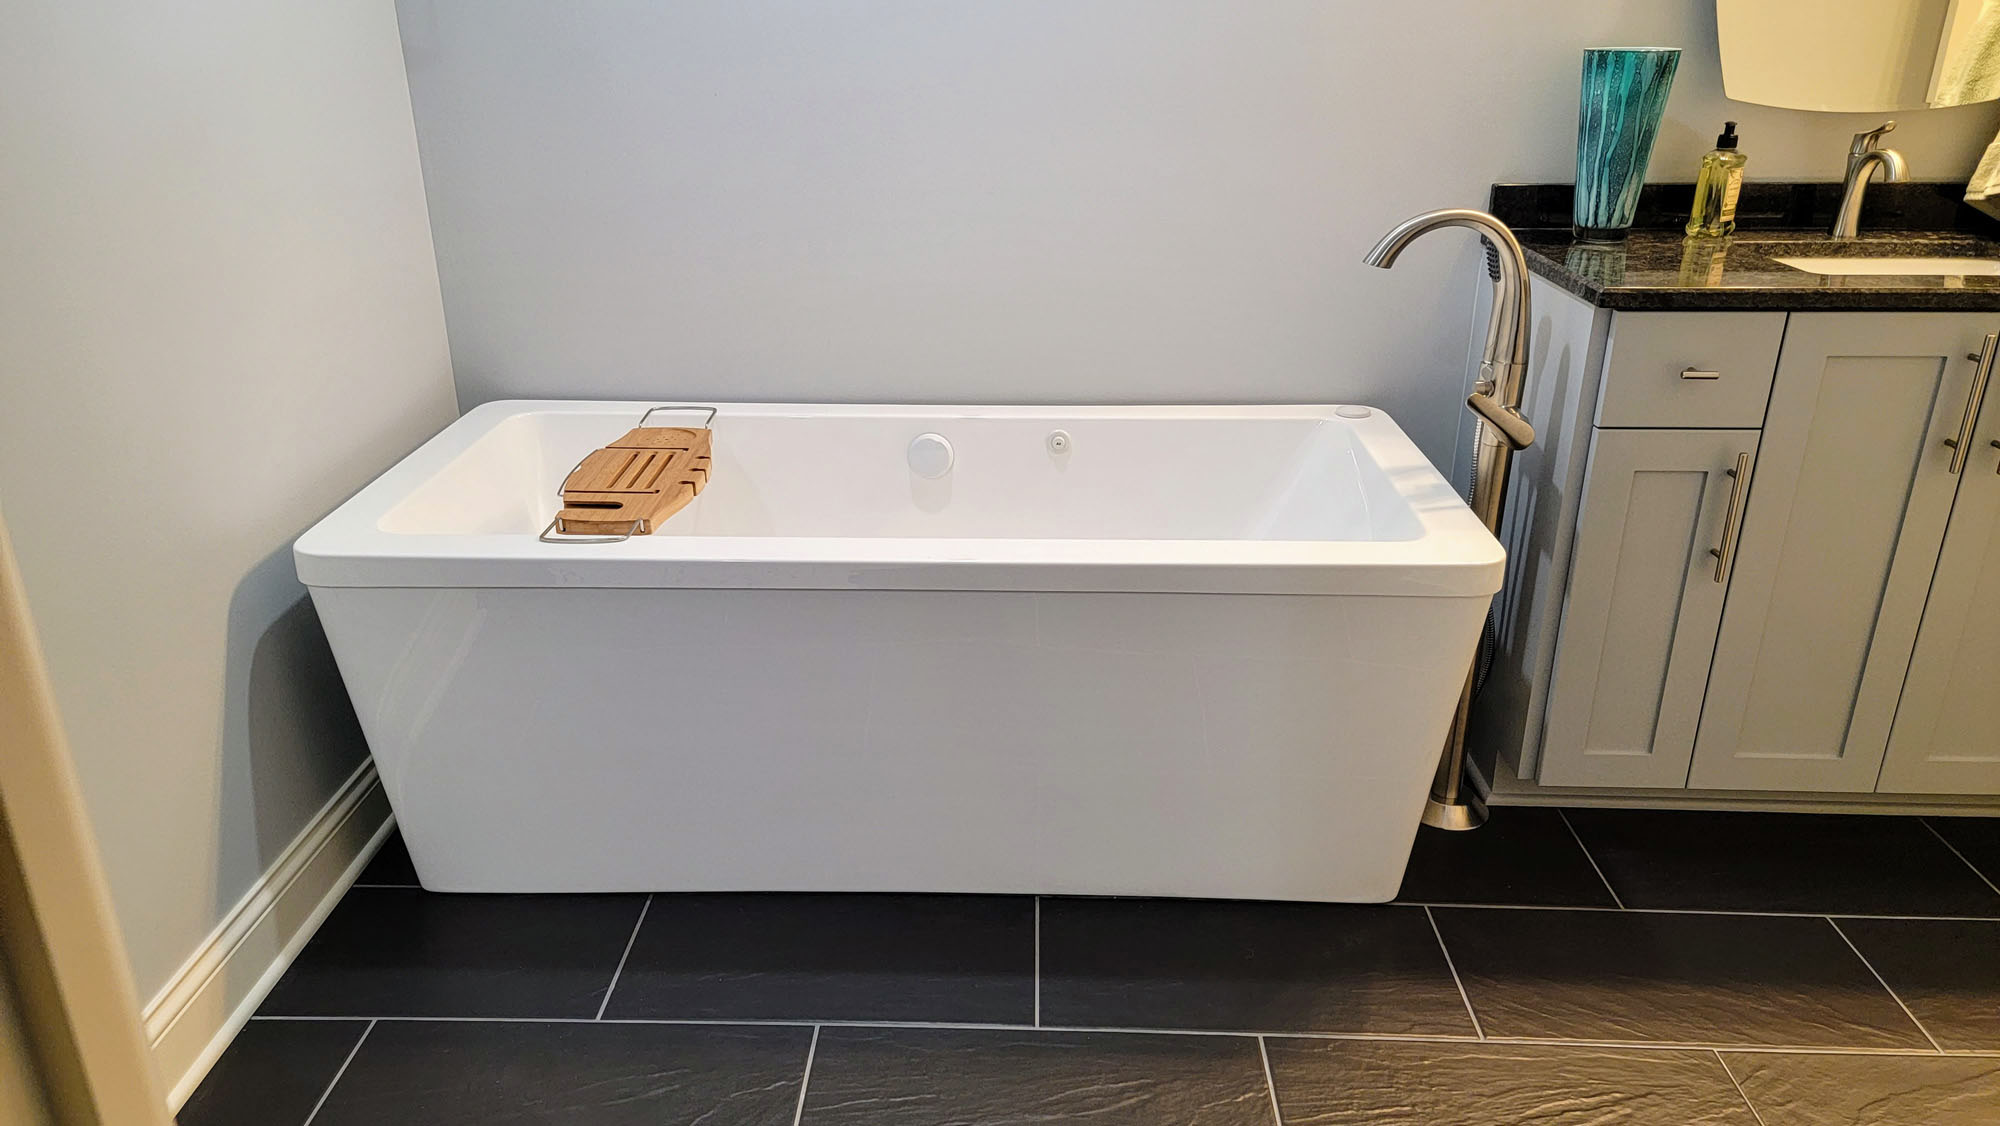 66″ x 36″ Freestanding (Jetted Tub)